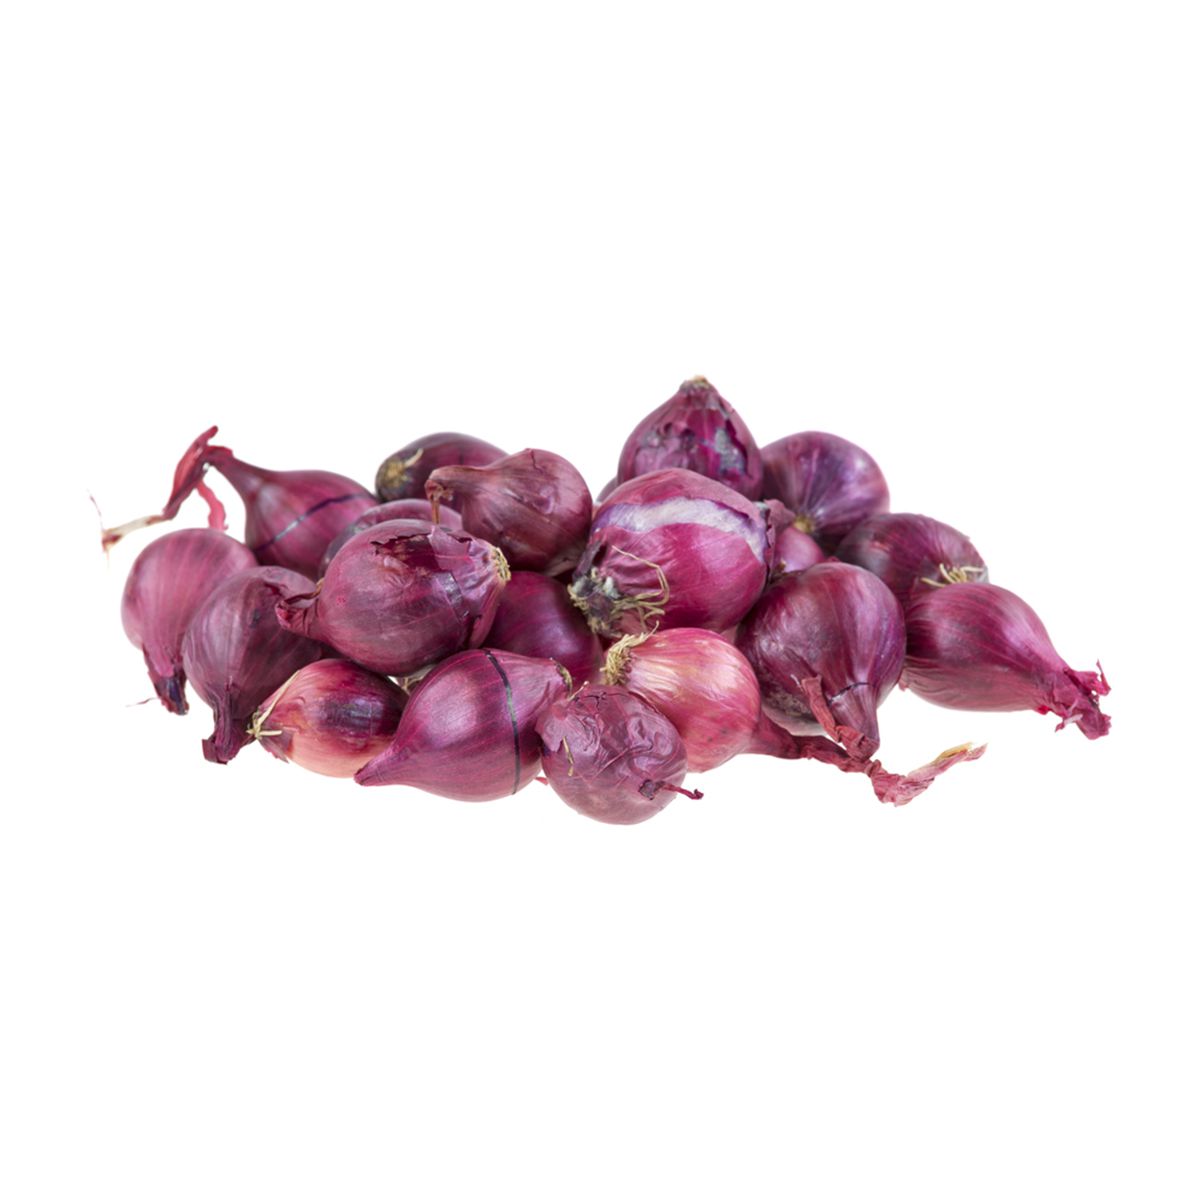 BoxNCase Red Pearl Onions